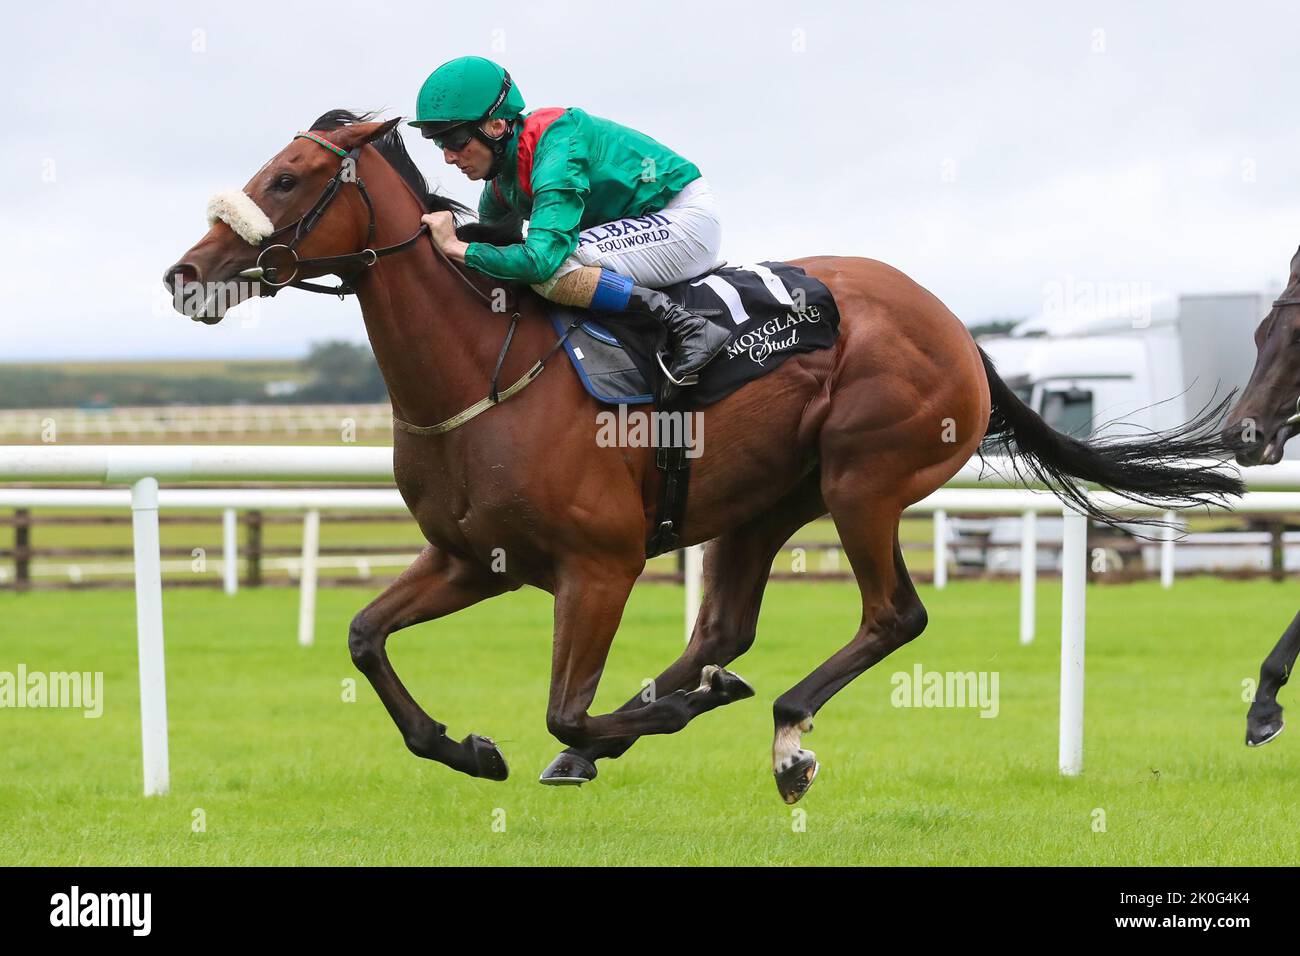 September 11, 2022, Kildare, USA: September 11, 2022: Tahiyra #11 ridden by Chris Hayes wins the Moyglare Stud Stakes (Group 1) on Irish Champions Weekend at The Curragh in Kildare, Ireland on September 11th, 2022. (Photo by Shamela Hanley/Eclipse Sportswire/CSM/Sipa USA) Stock Photo